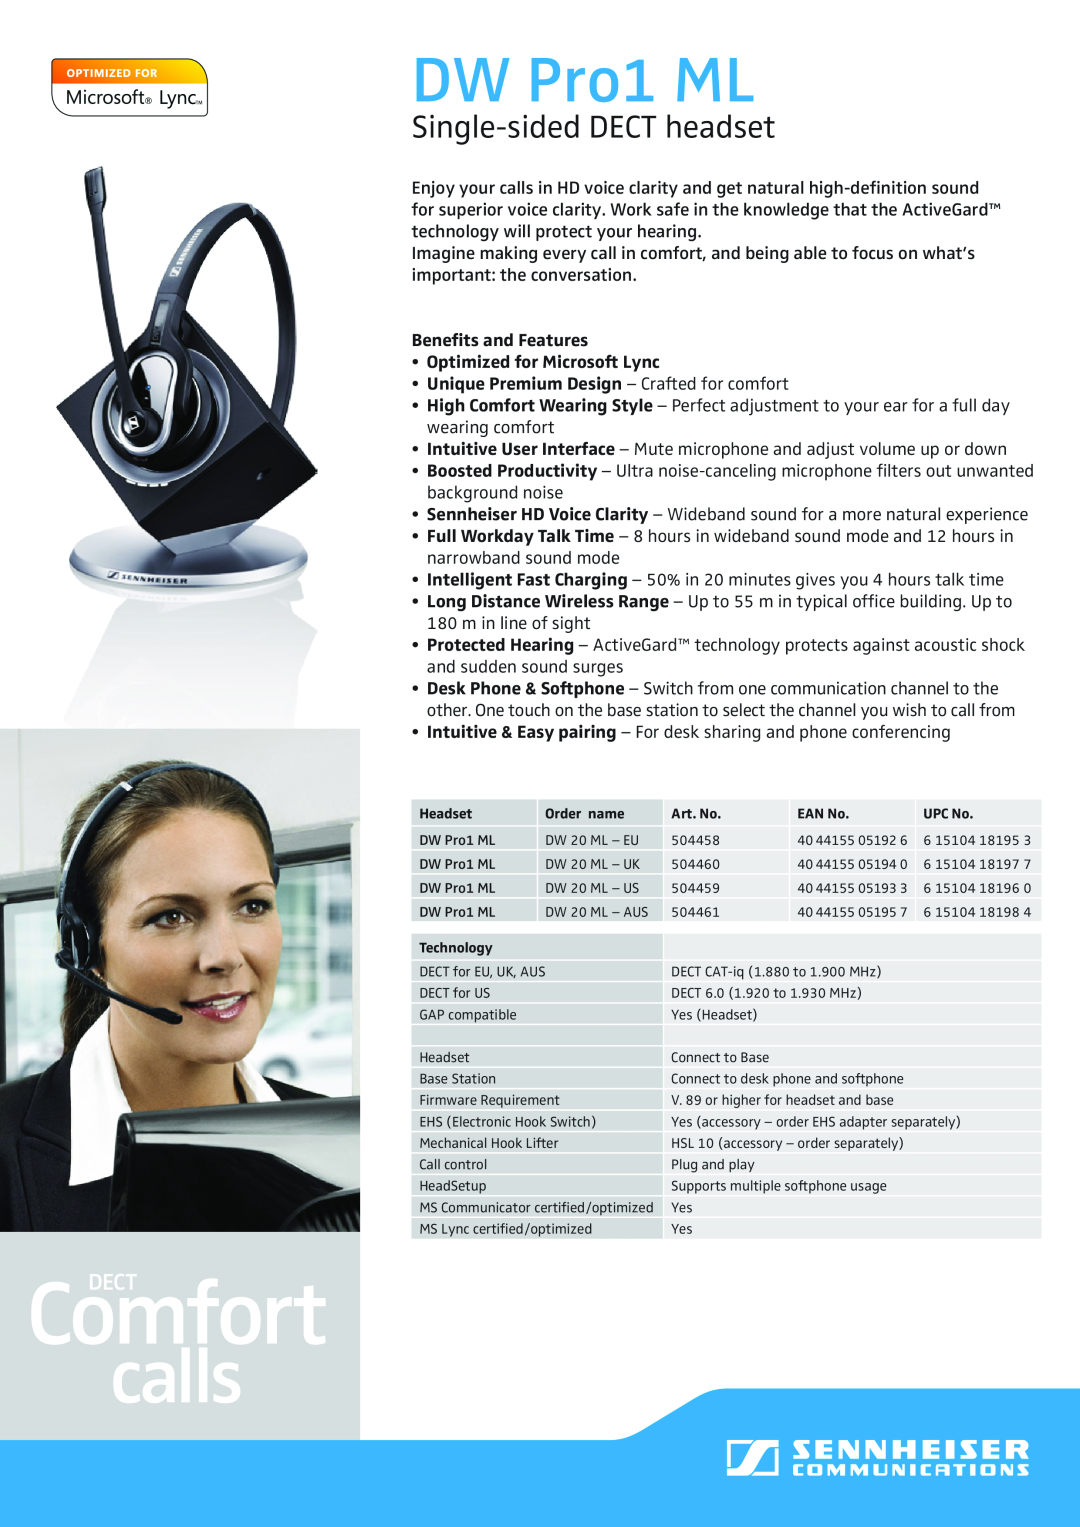 Sennheiser 504459, 504461 manual DW Pro1 ML, Single-sidedDECT headset, Benefits and Features, Optimized for Microsoft Lync 